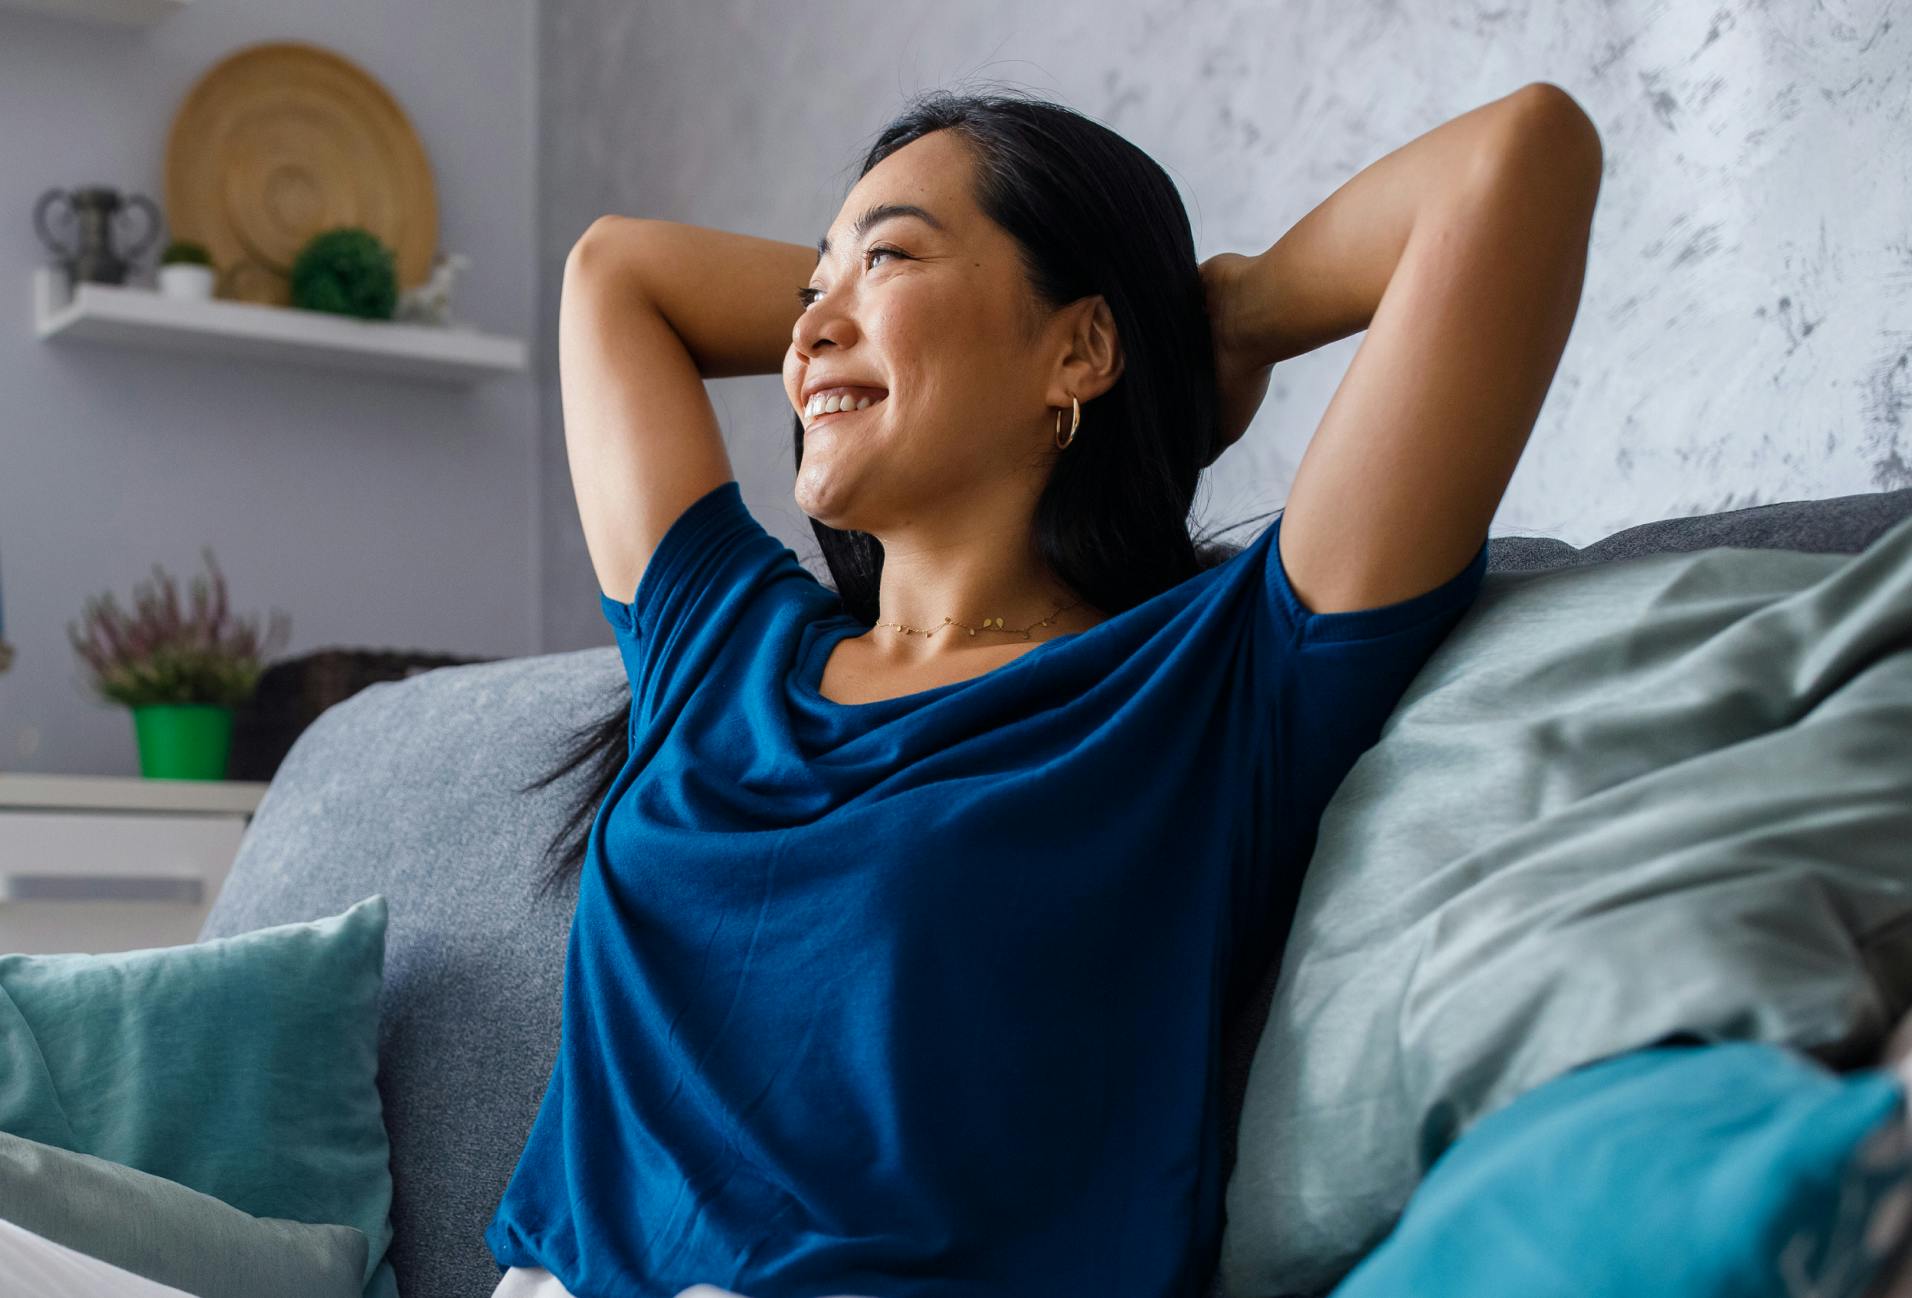 woman smiling and looking relieved on couch